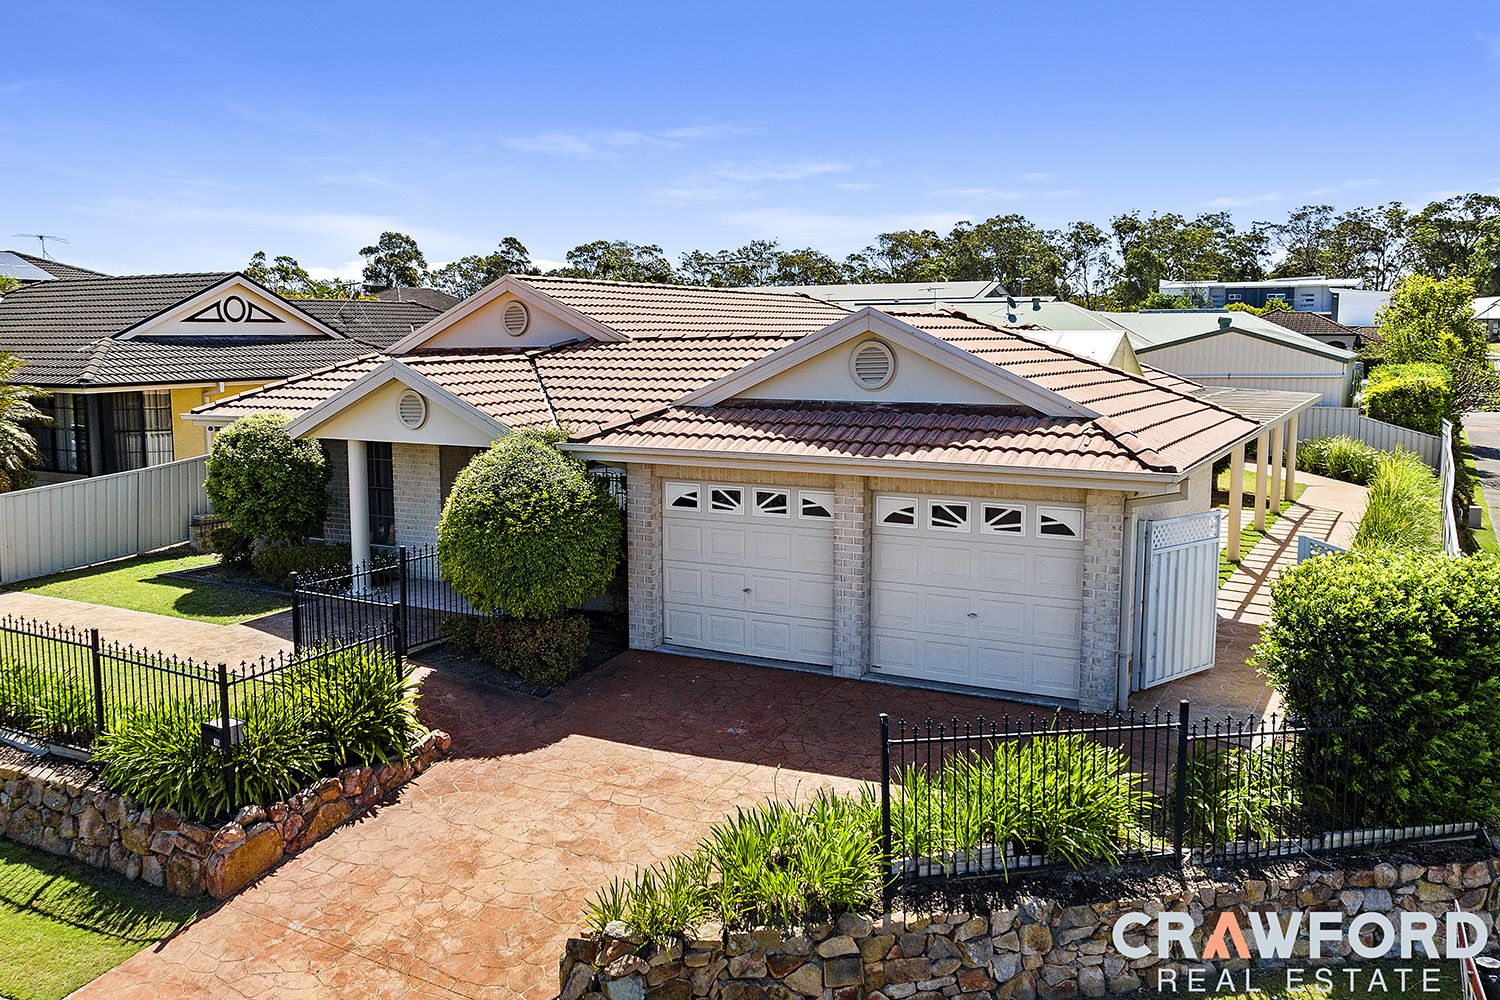 4 bedrooms House in 15 Rosettes Street FLETCHER NSW, 2287